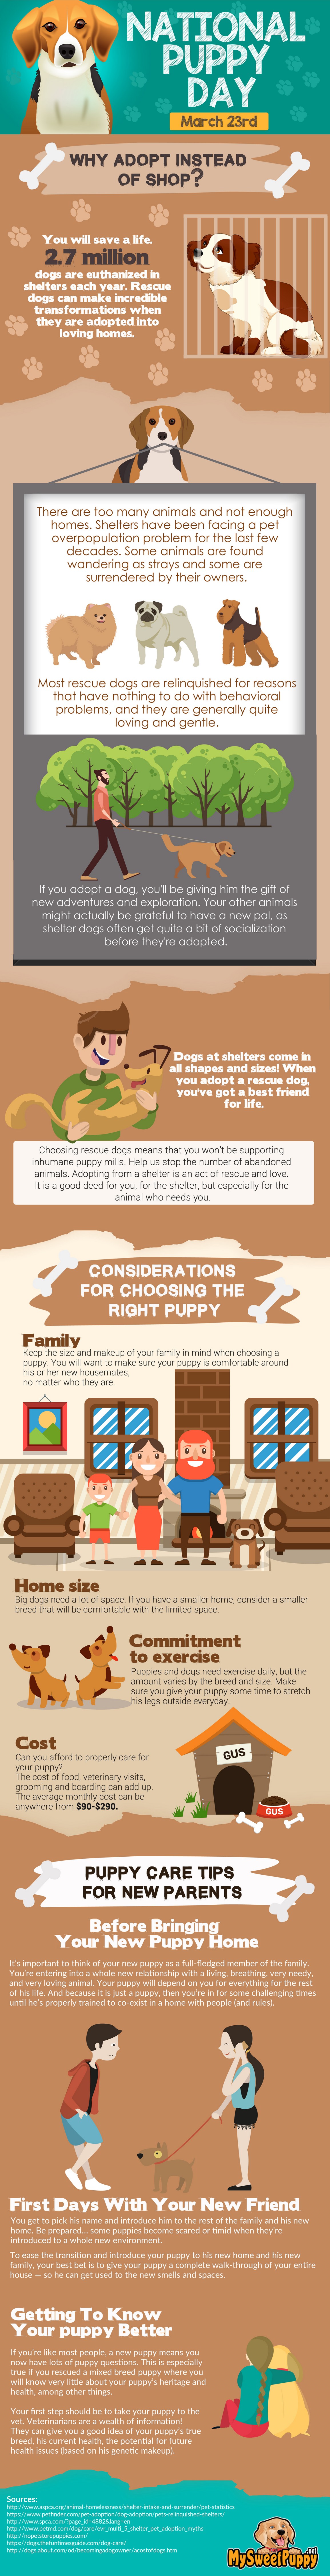 National_Puppy_day infographic